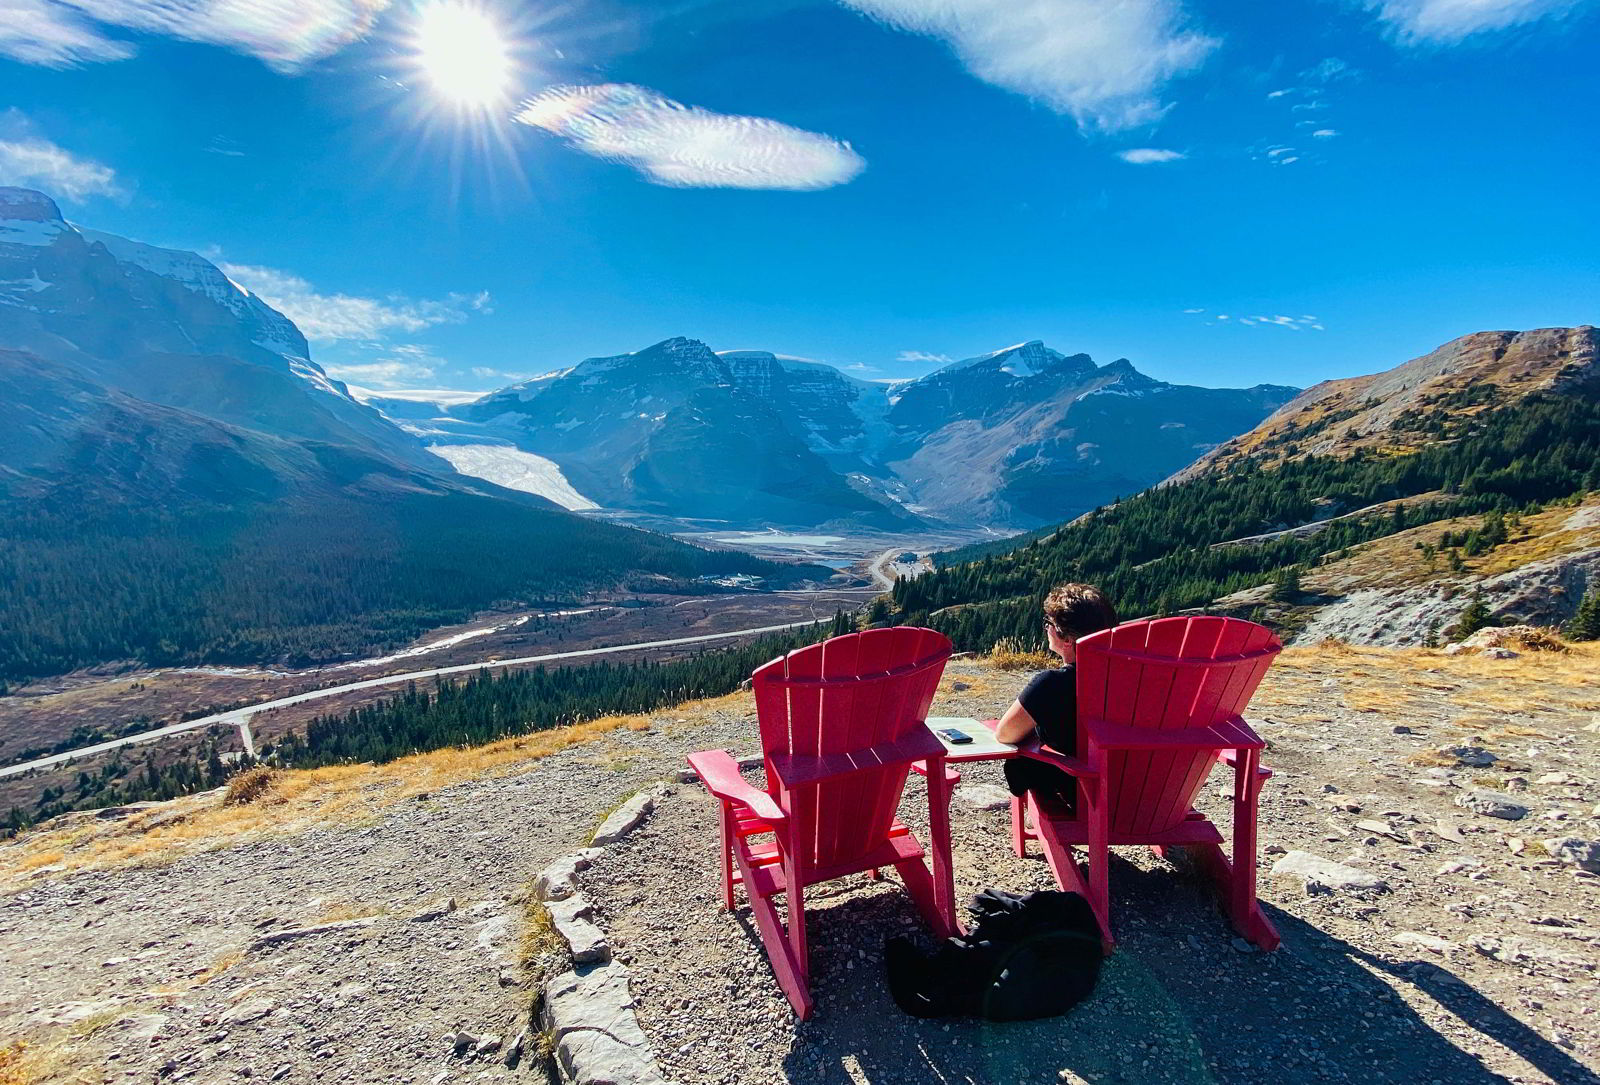 An image of someone sitting in a red chair and taking in the view of the Athabasca Glacier on the Wilcox Pass lookout hike in Jasper National Park, Alberta, Canada.